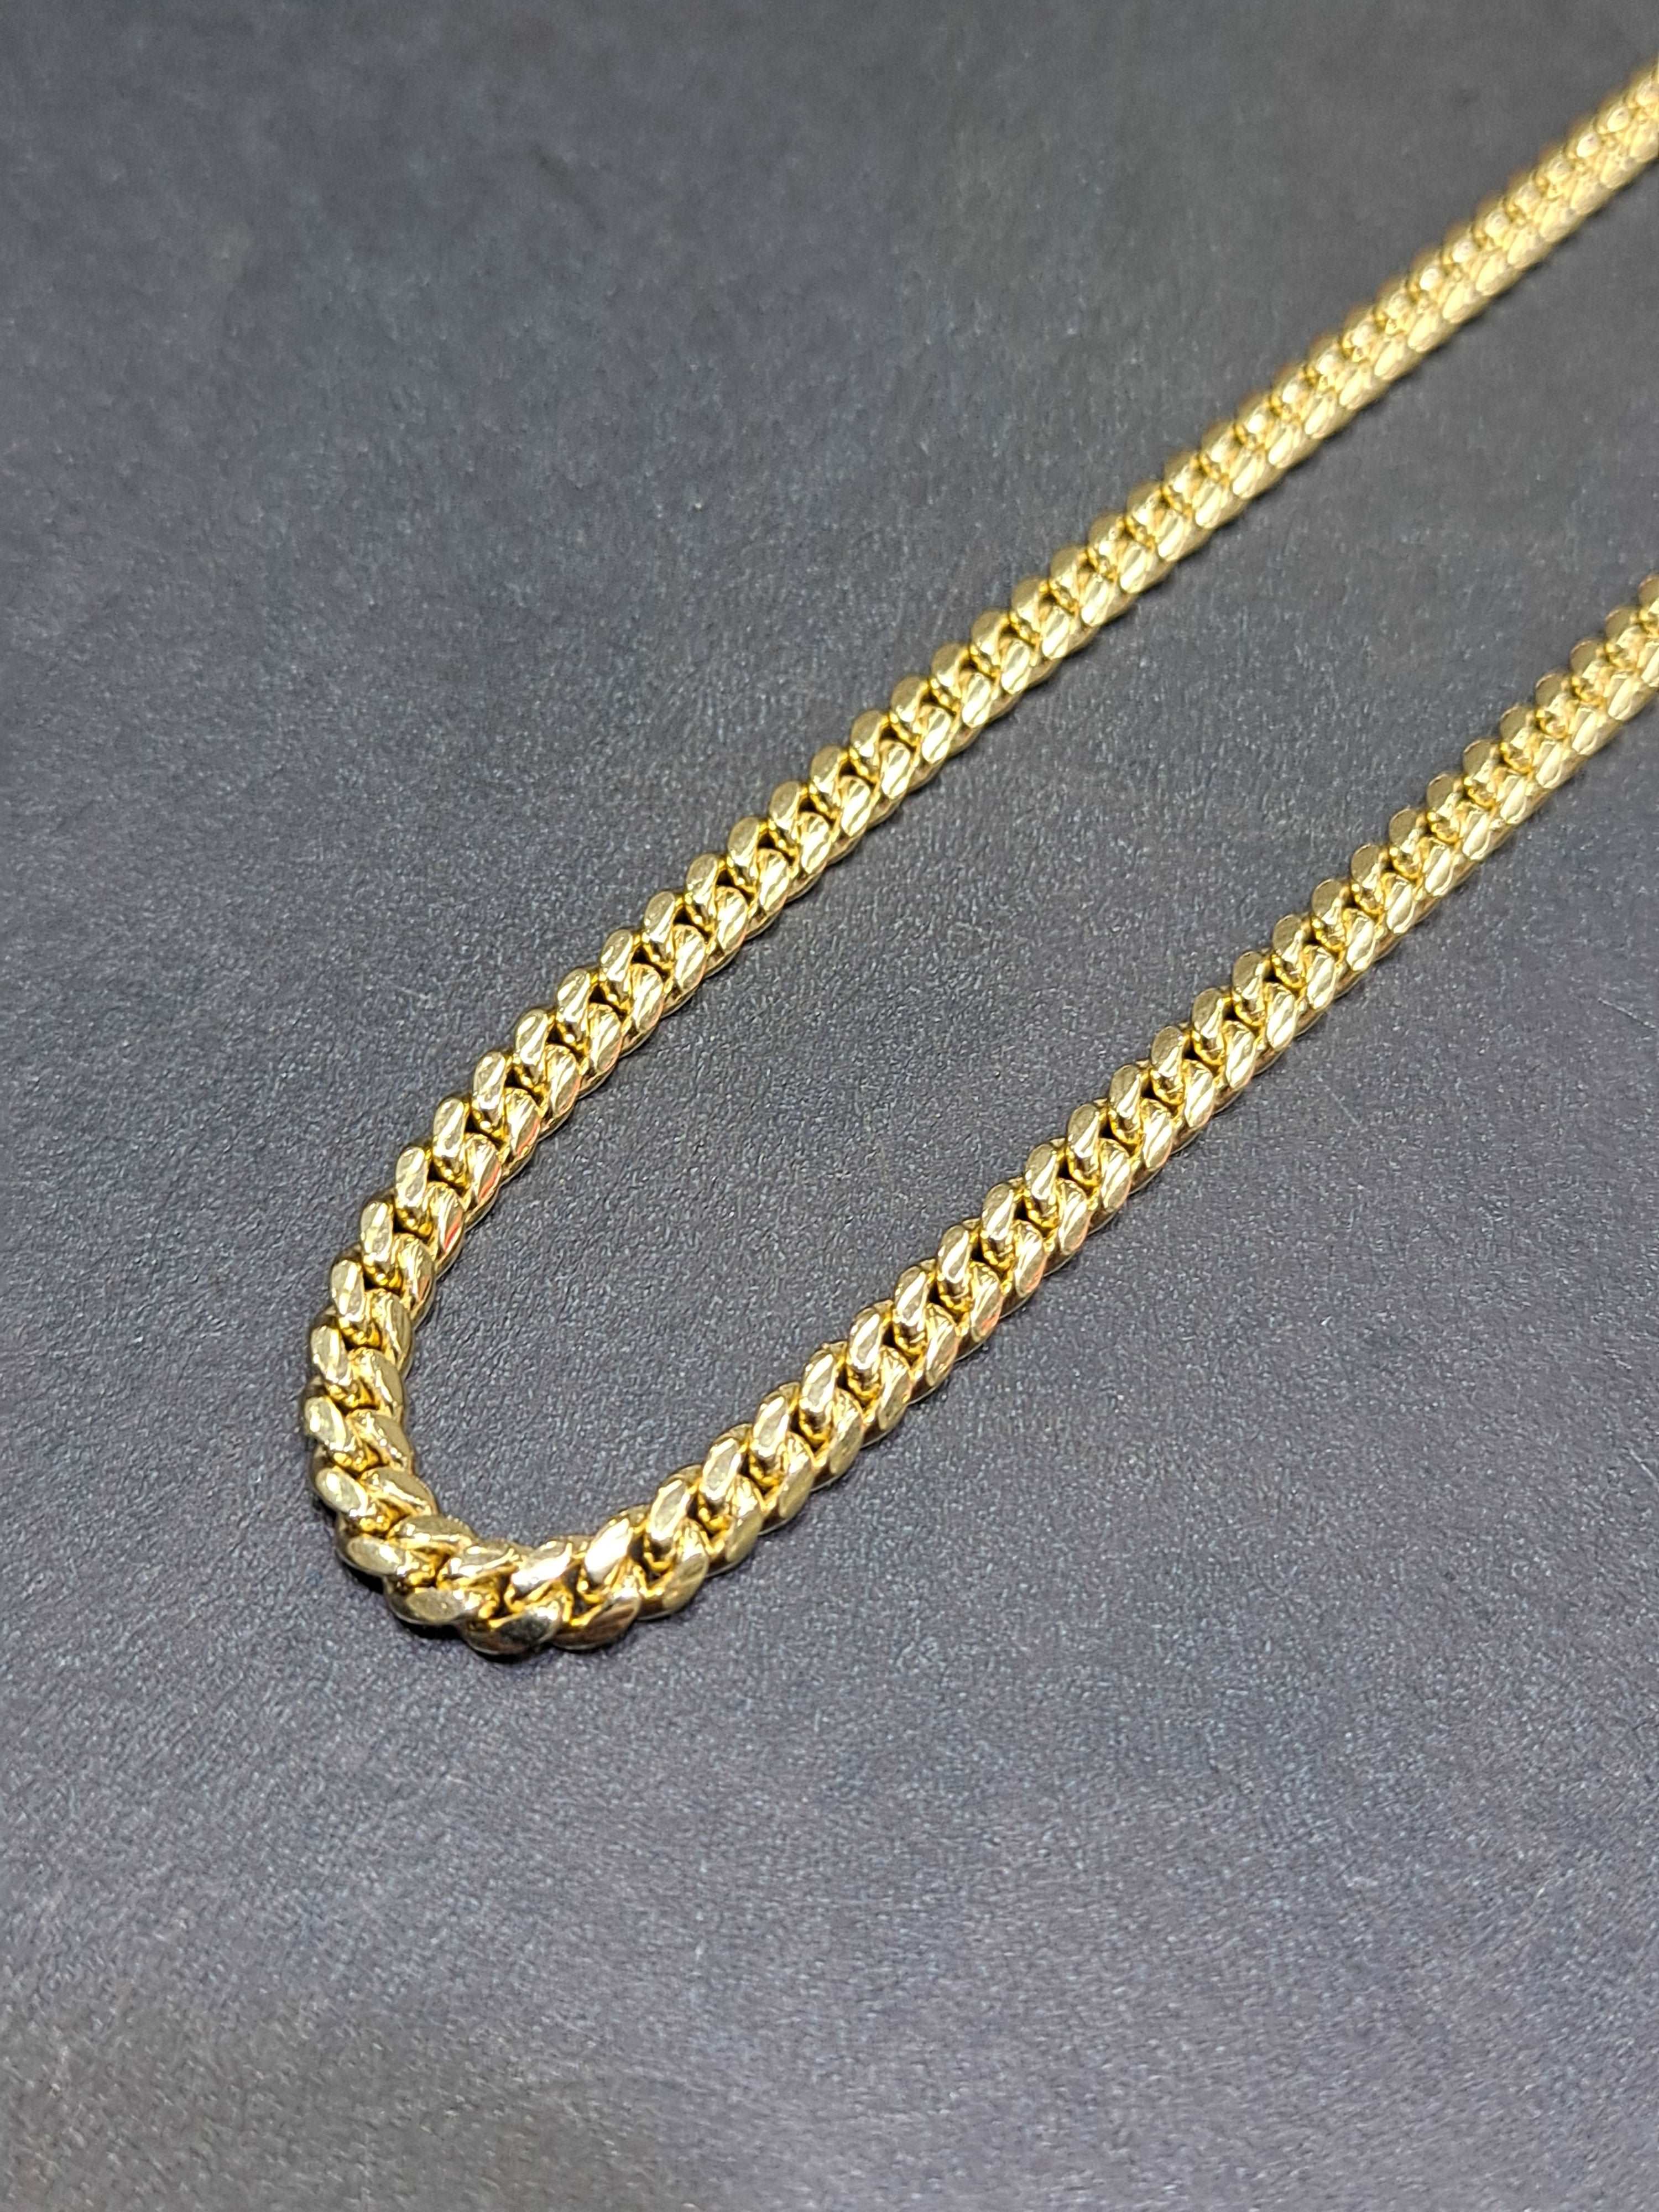 10k new solid miami cuban link 3.5mm,20 gram,24inches!